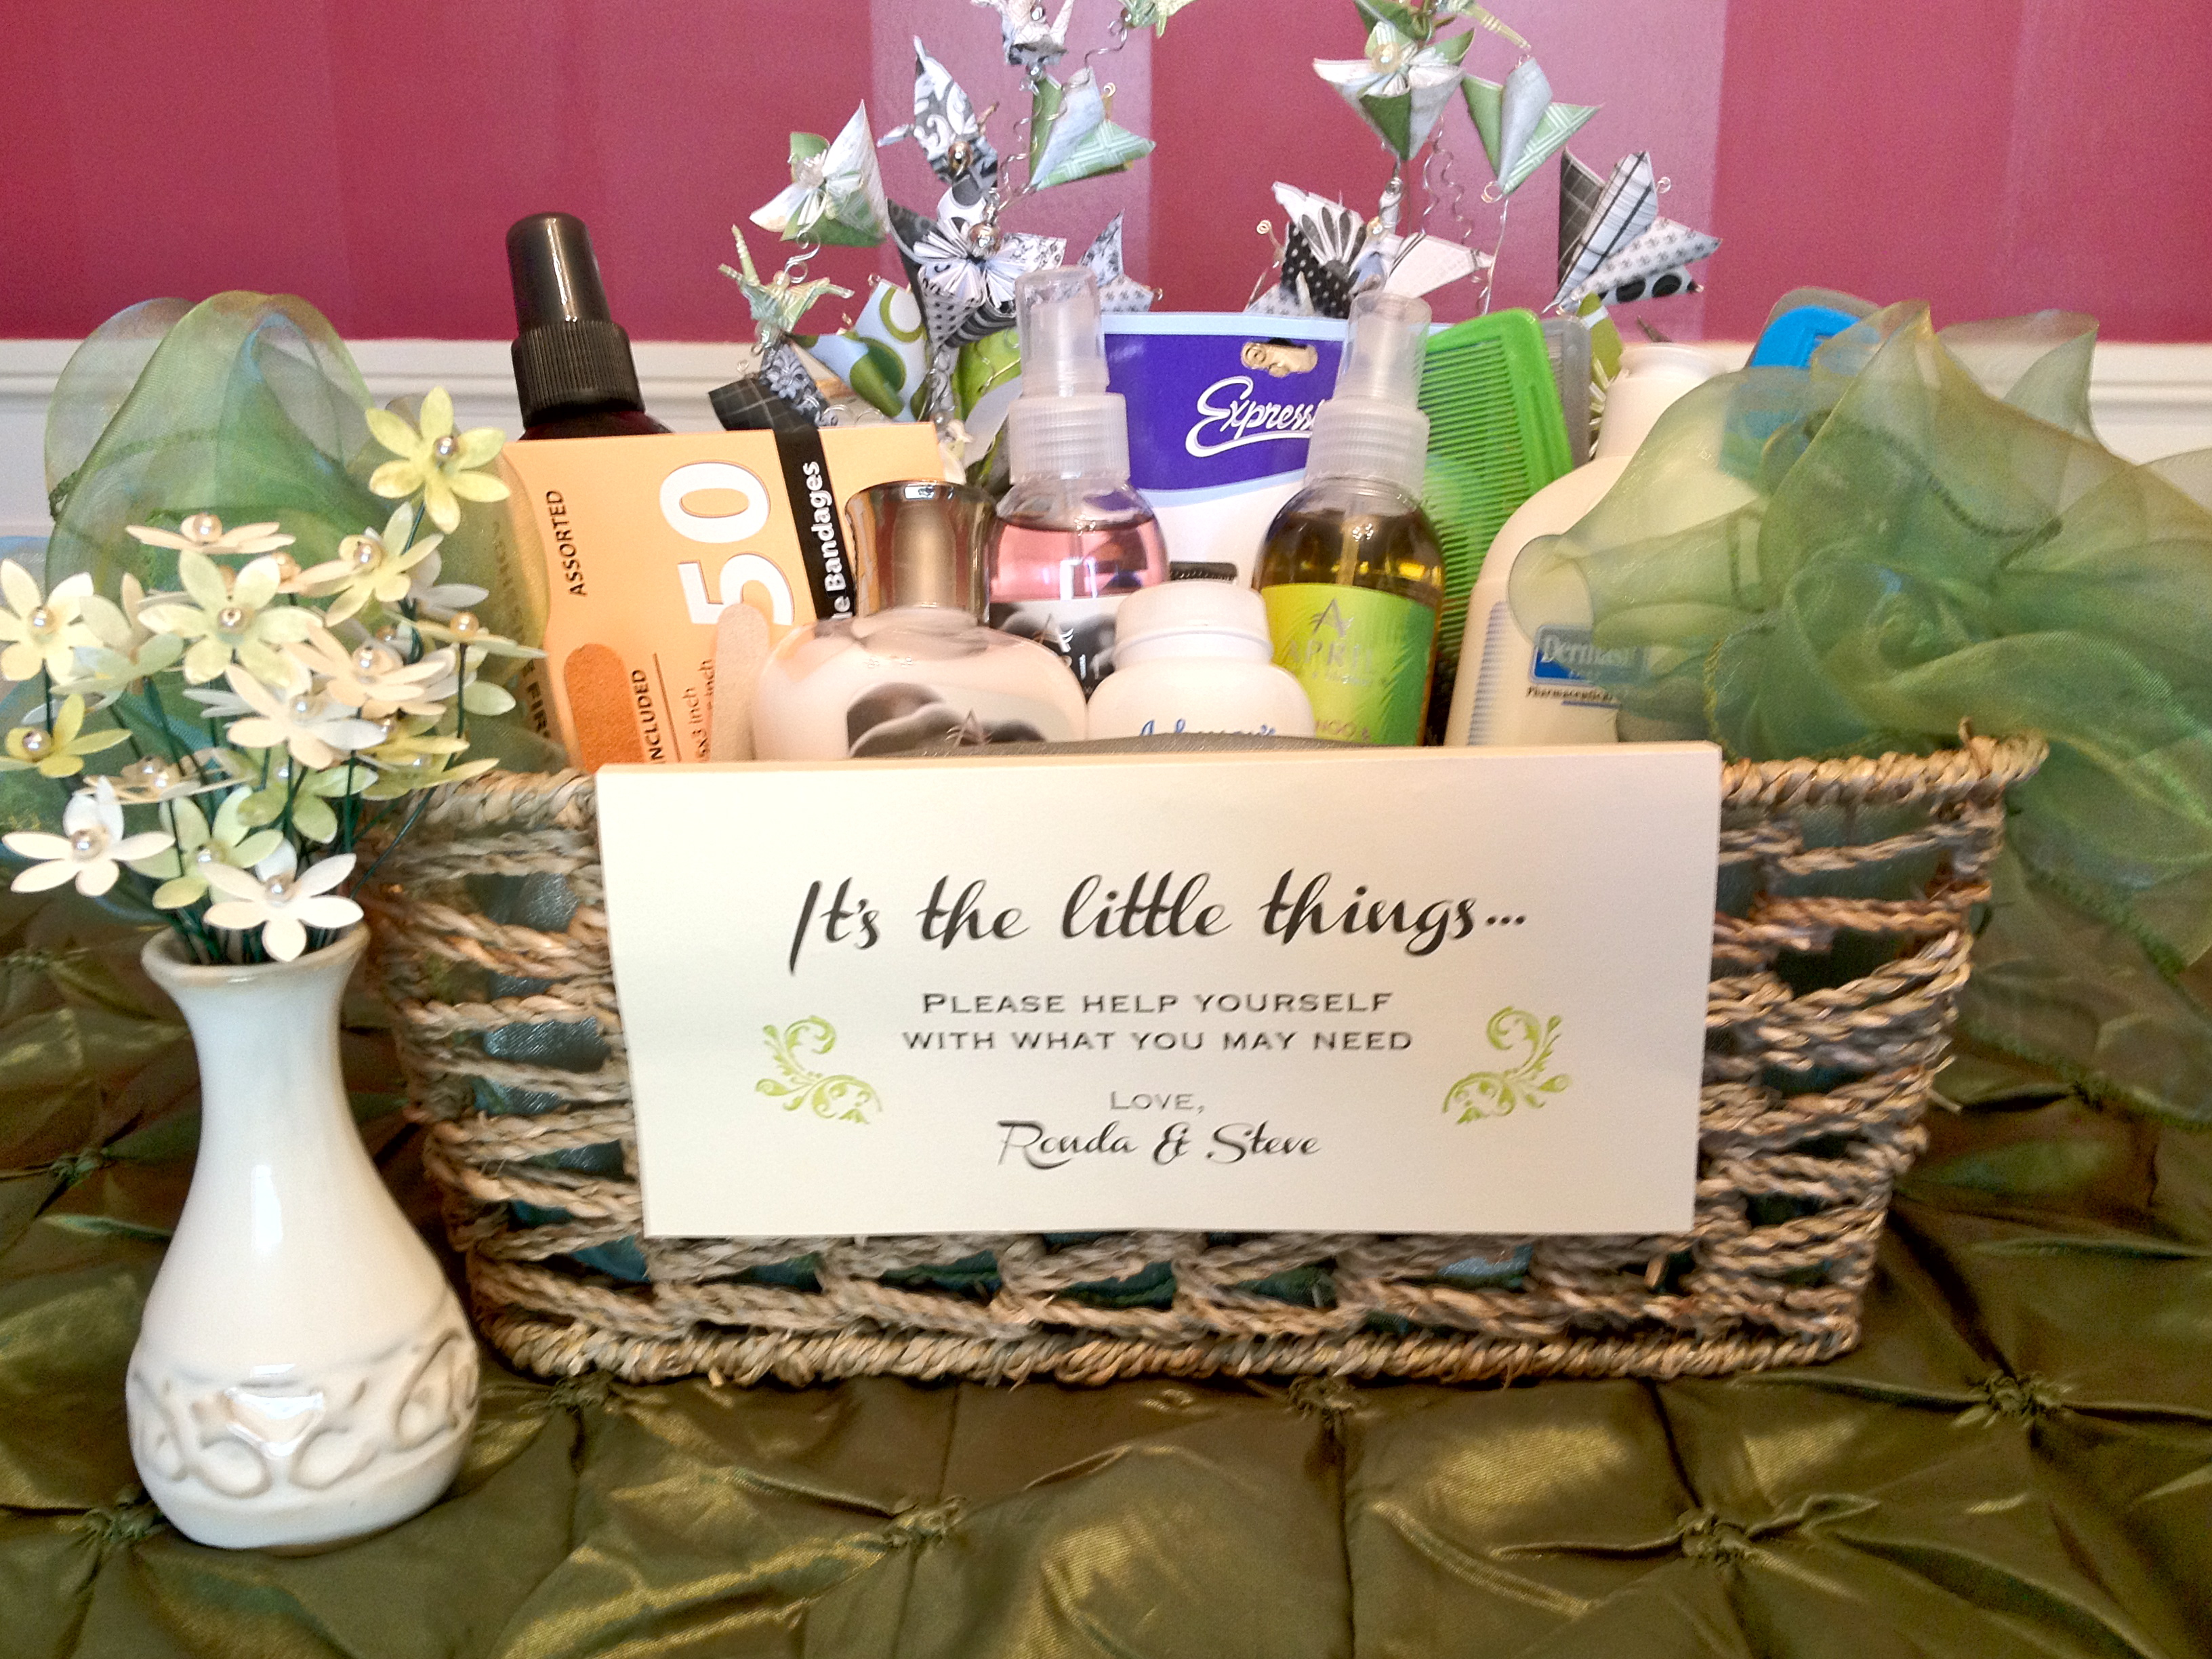 50 Wedding Bathroom Basket Ideas to Shower Your Guests With Love